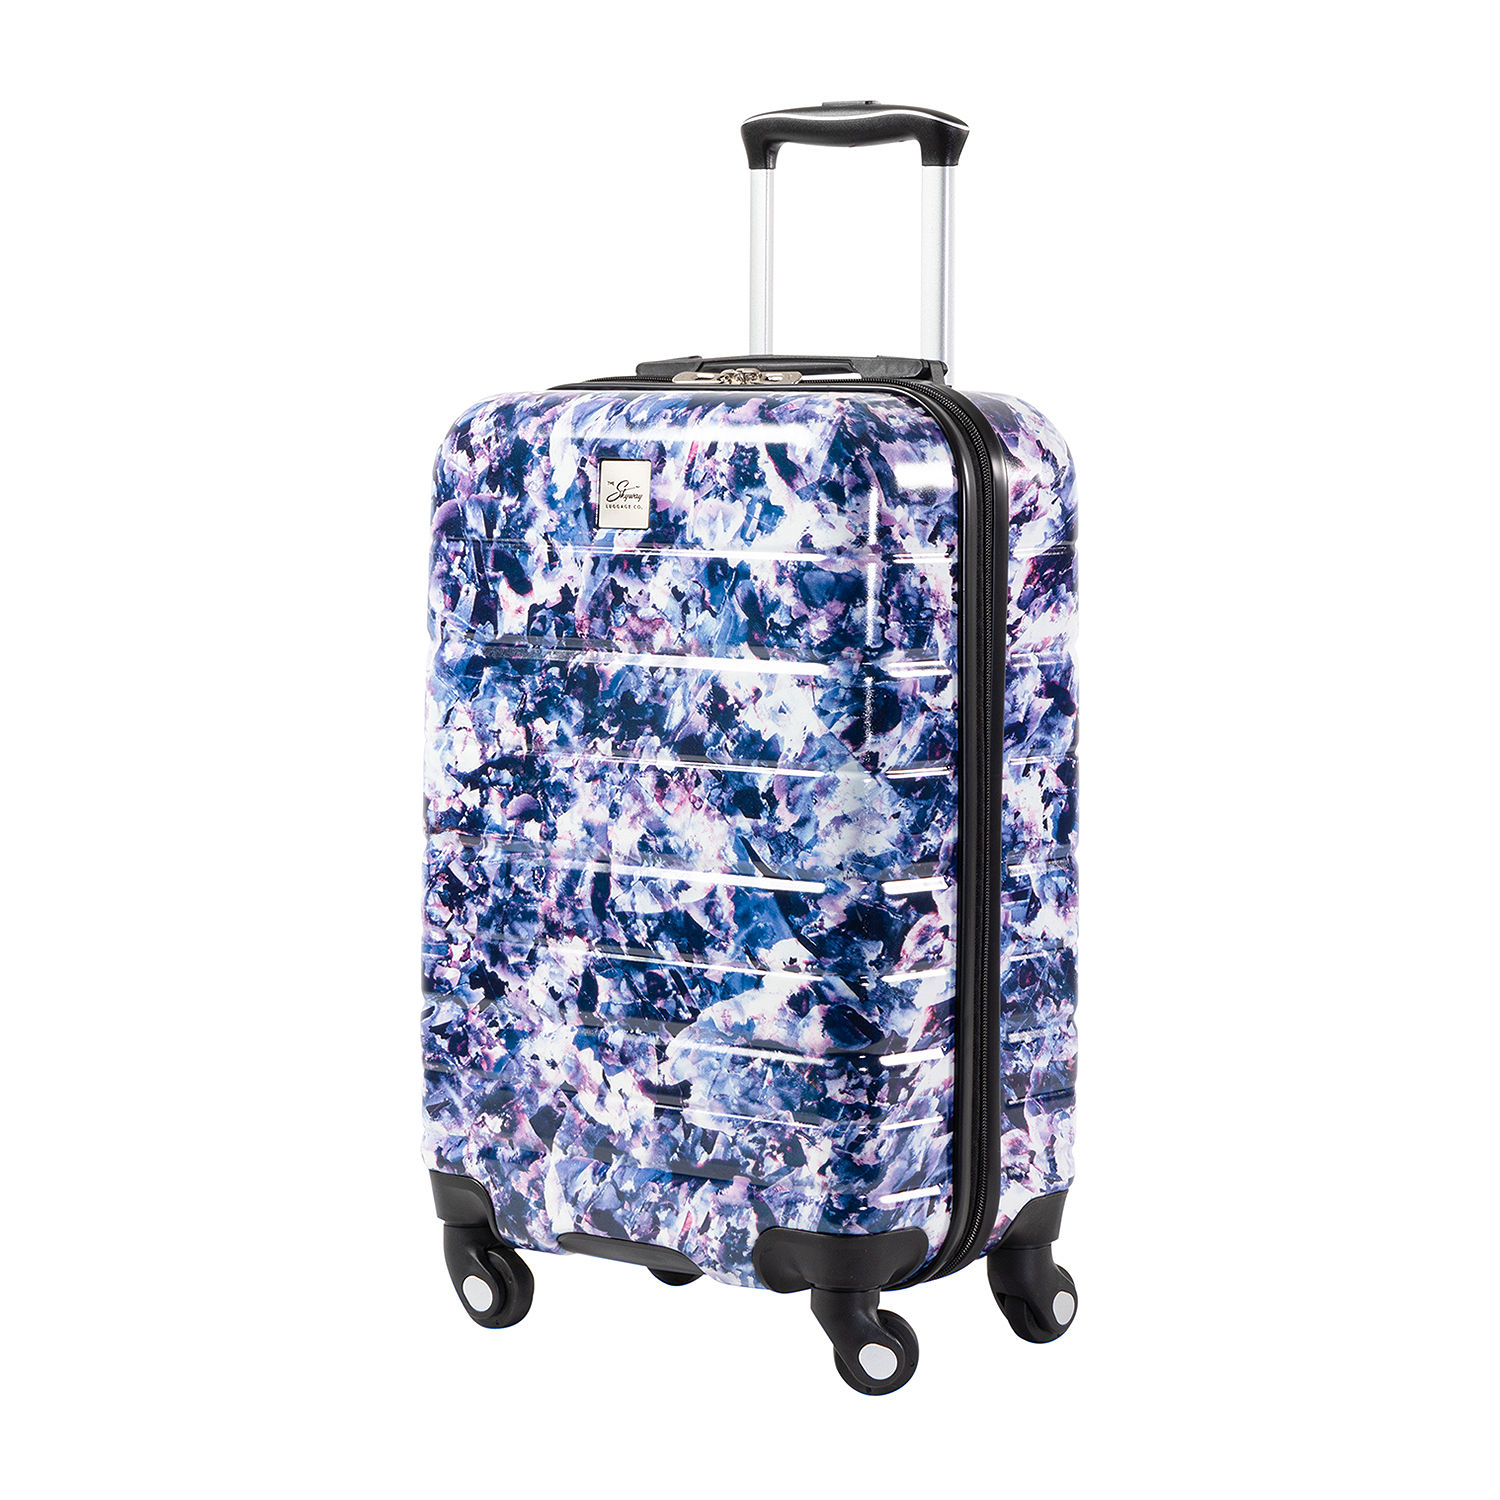 JC Penny - $49.99 Any Size Luggage Collection